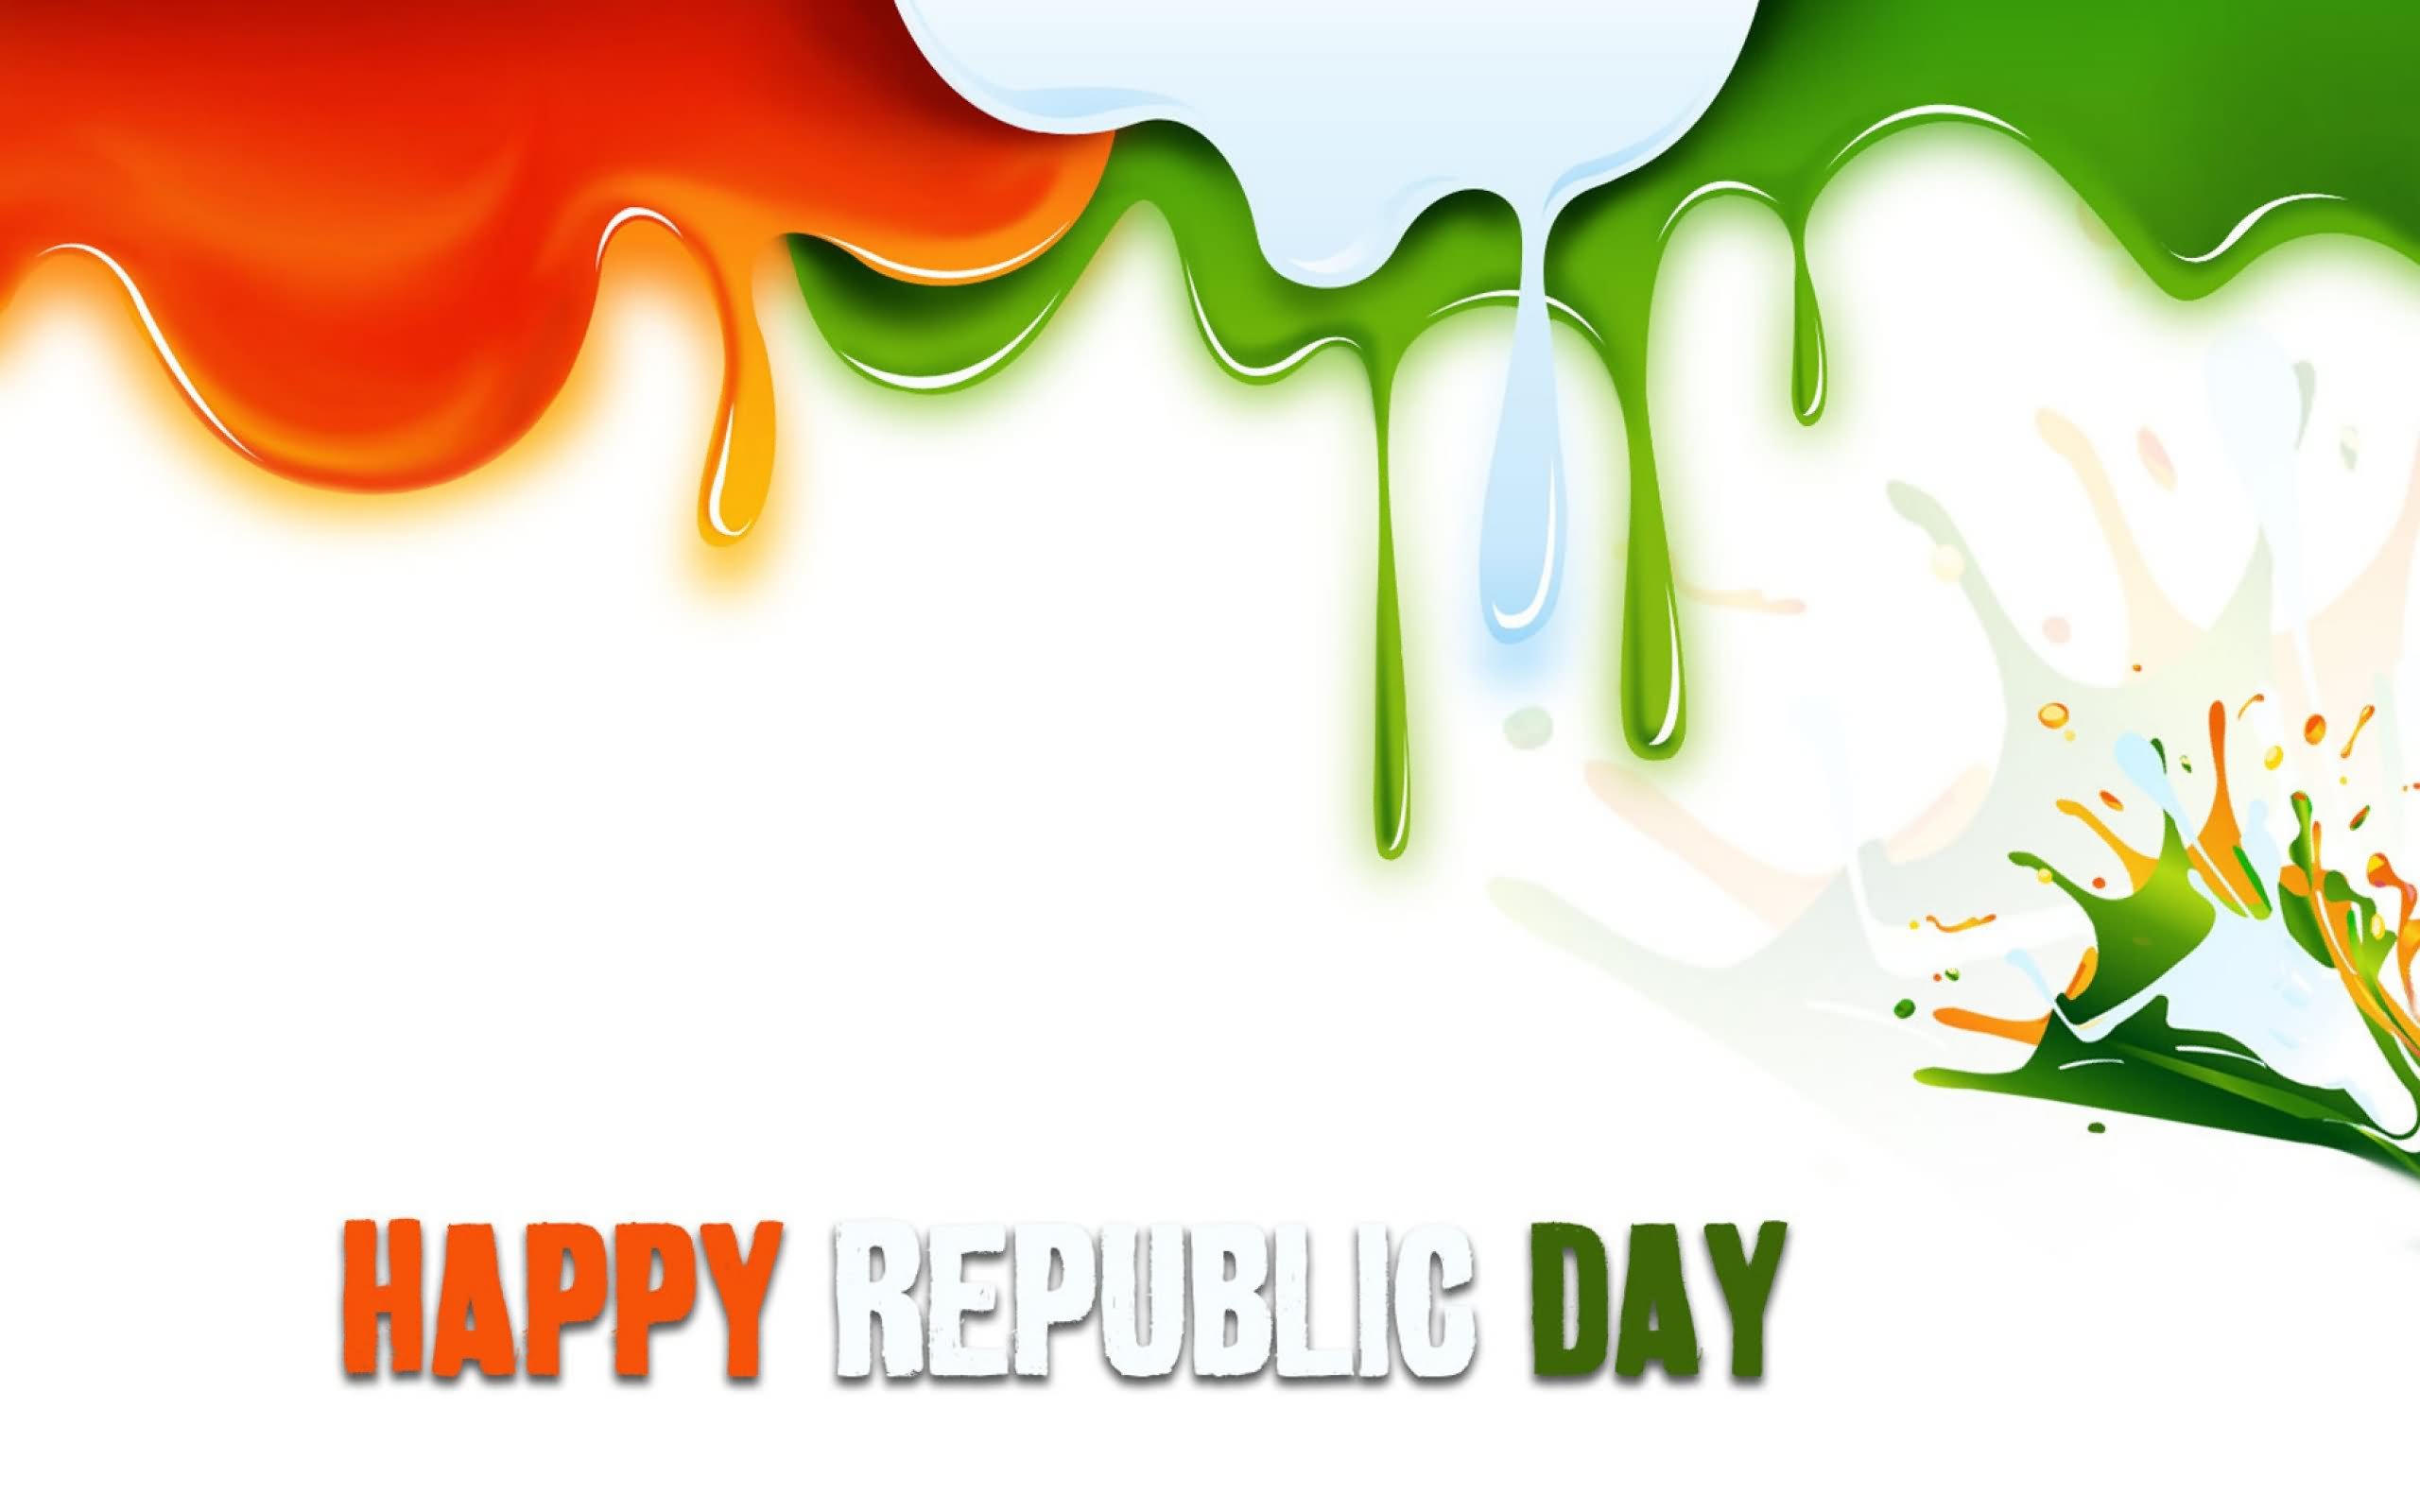 45 Best Republic Day Backgrounds